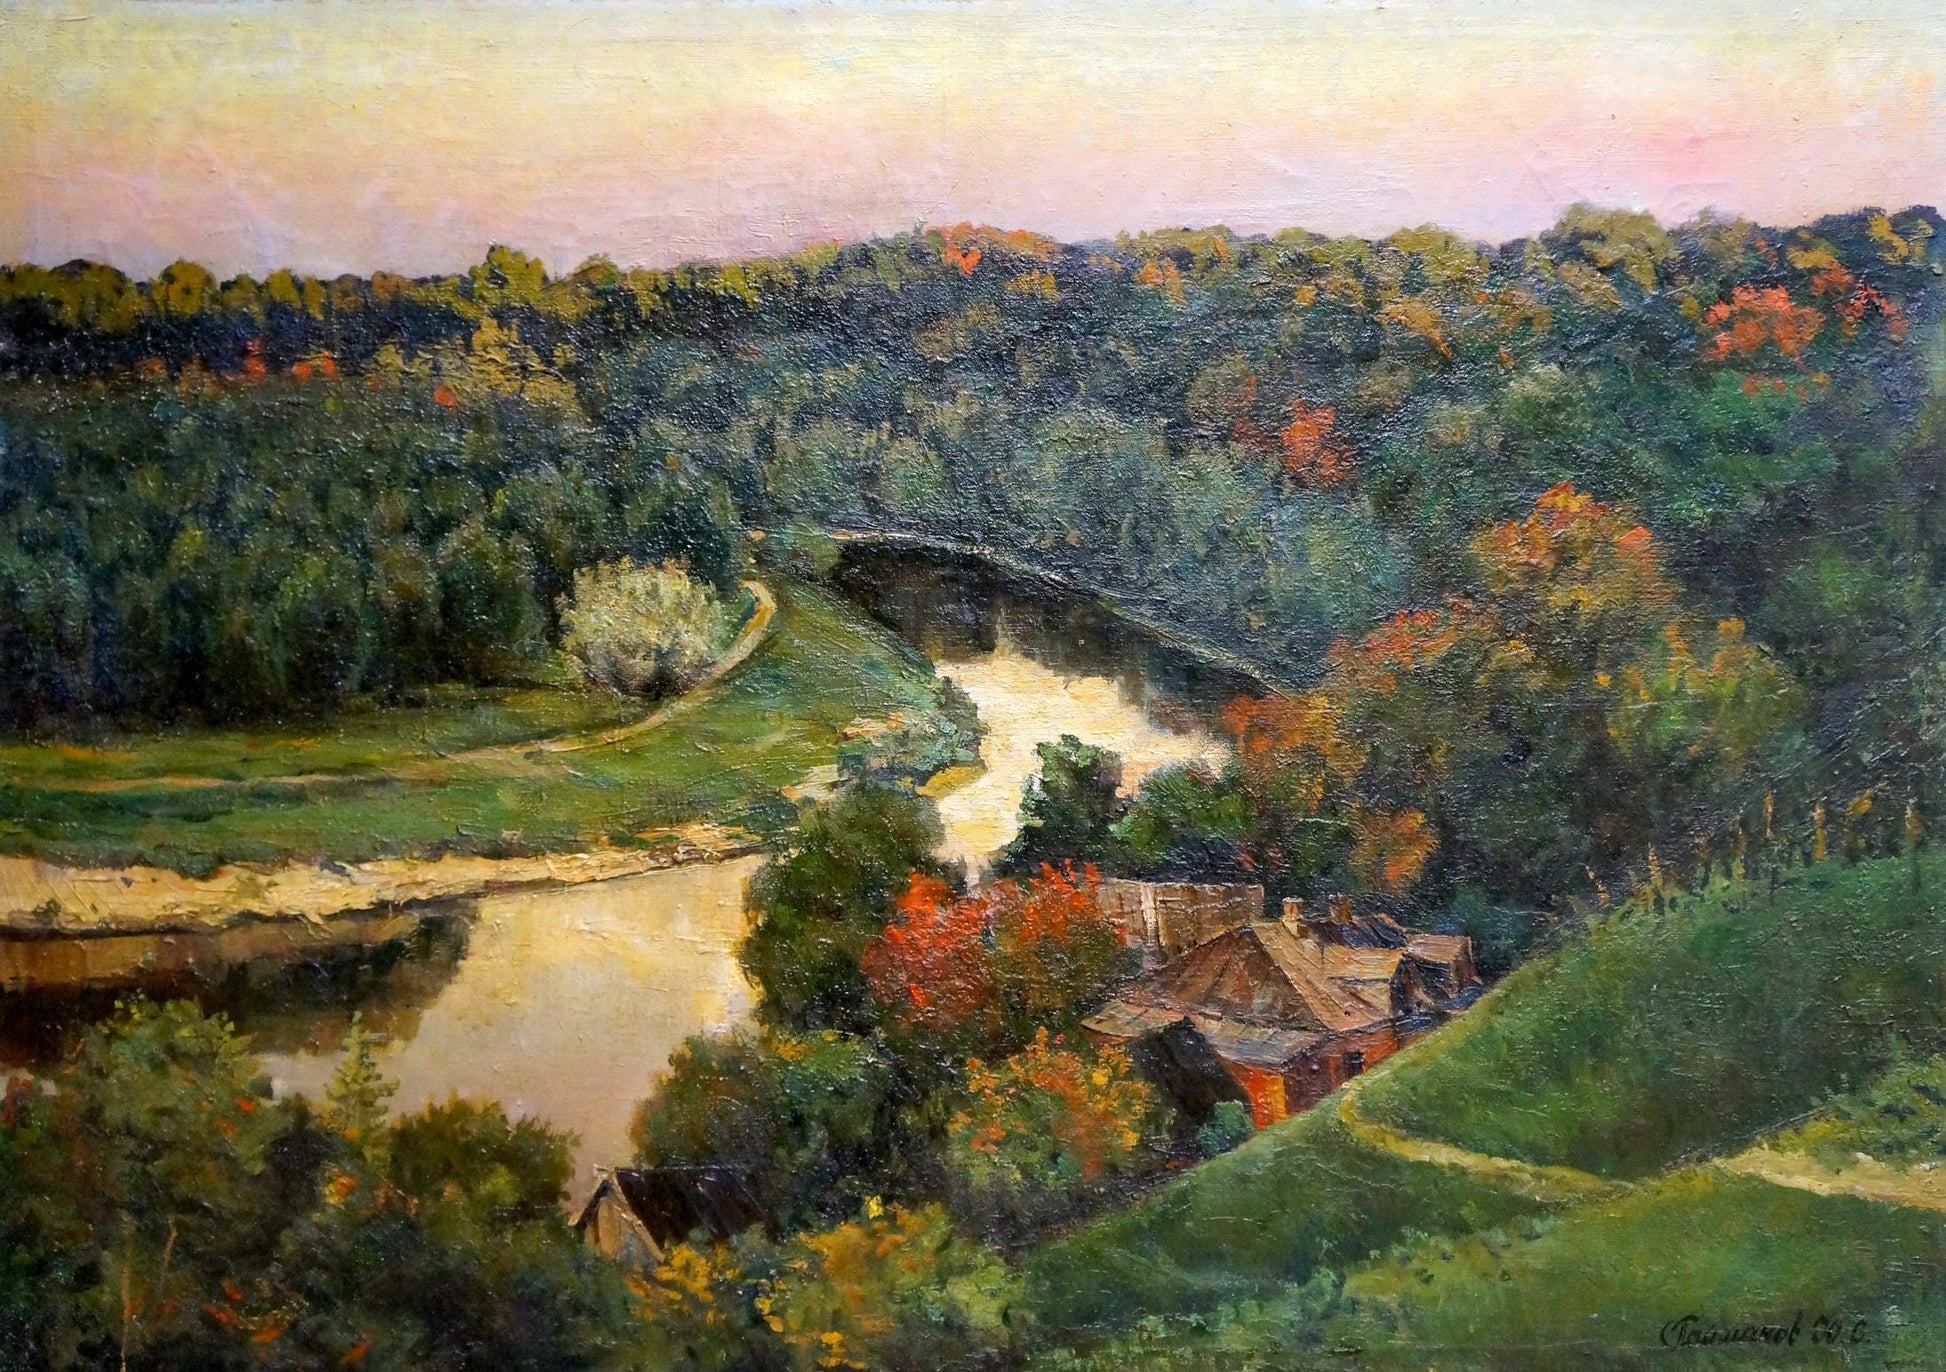 Landscape by Y. S. Poymanov, an oil painting portraying natural beauty.